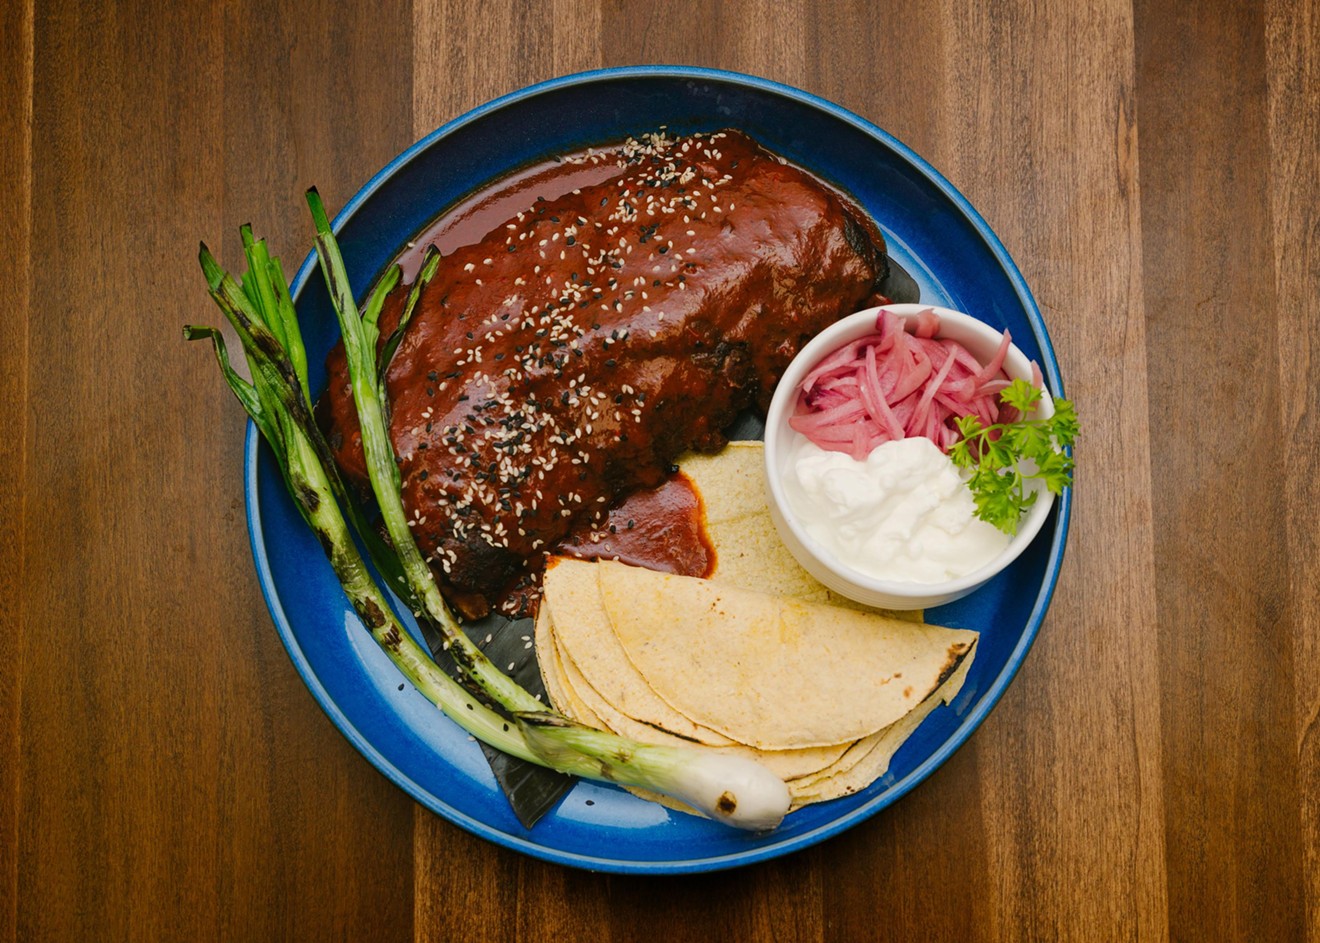 The Achiote Braised Ribs is a Latin twist on Texas barbecue.